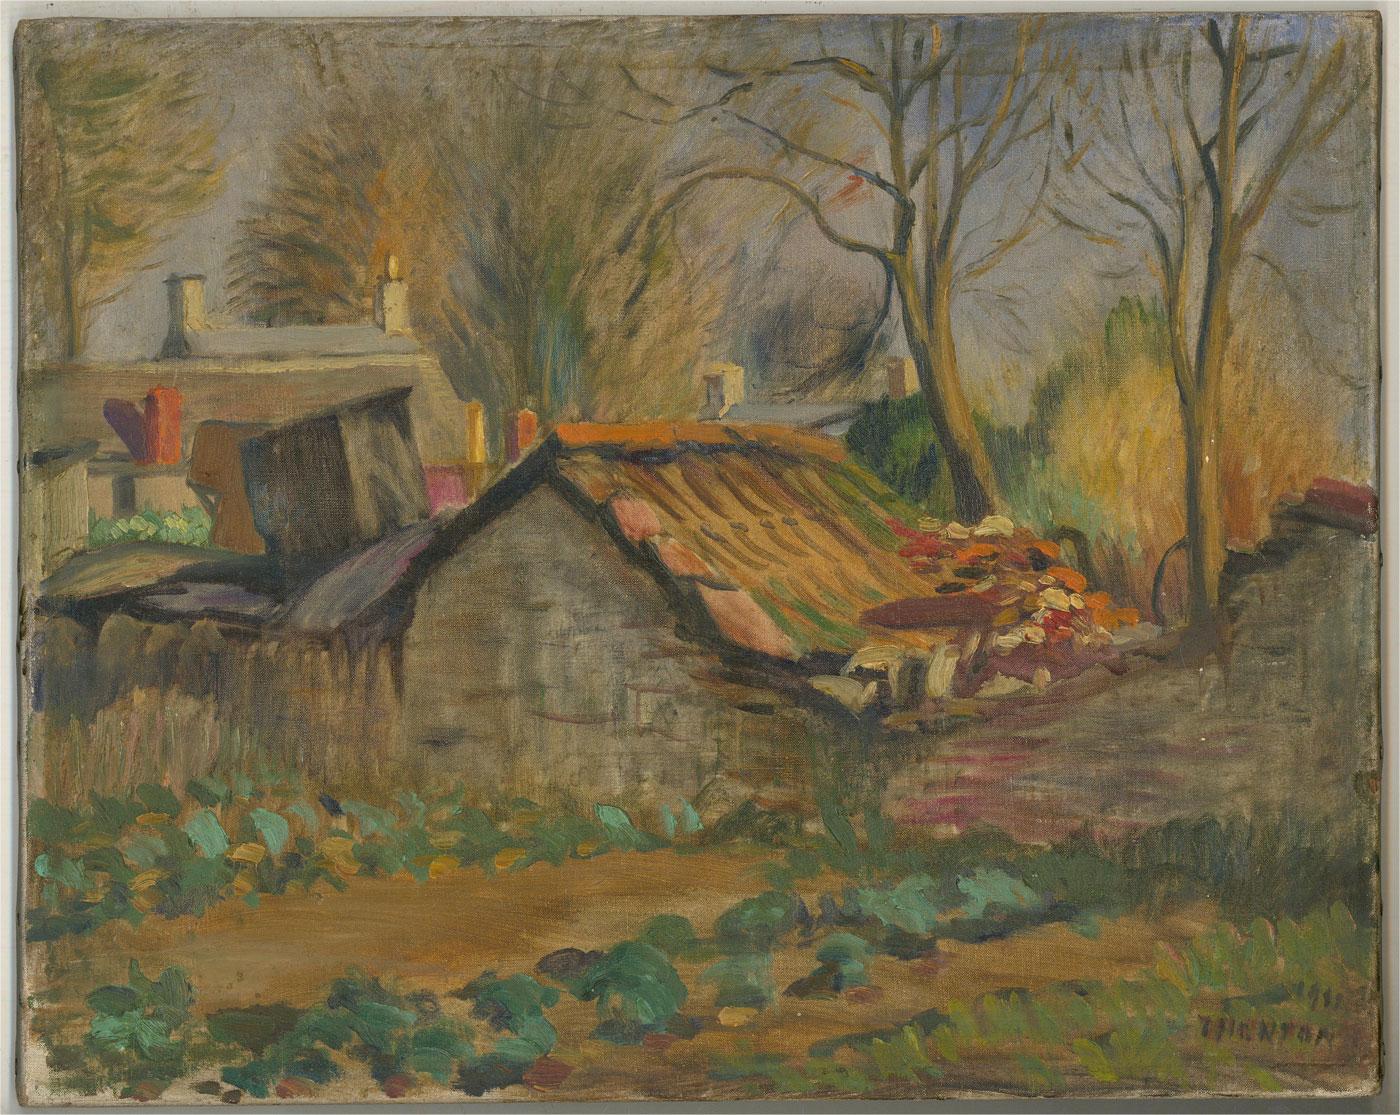 A colorful, autumnal oil showing the back of a dilapidated pigsty outhouse with tumbled down wall and missing roof tiles, in the town of Painswick in Gloucestershire. Bright Autumn sunshine shines on the scene and the branches of bare trees stand